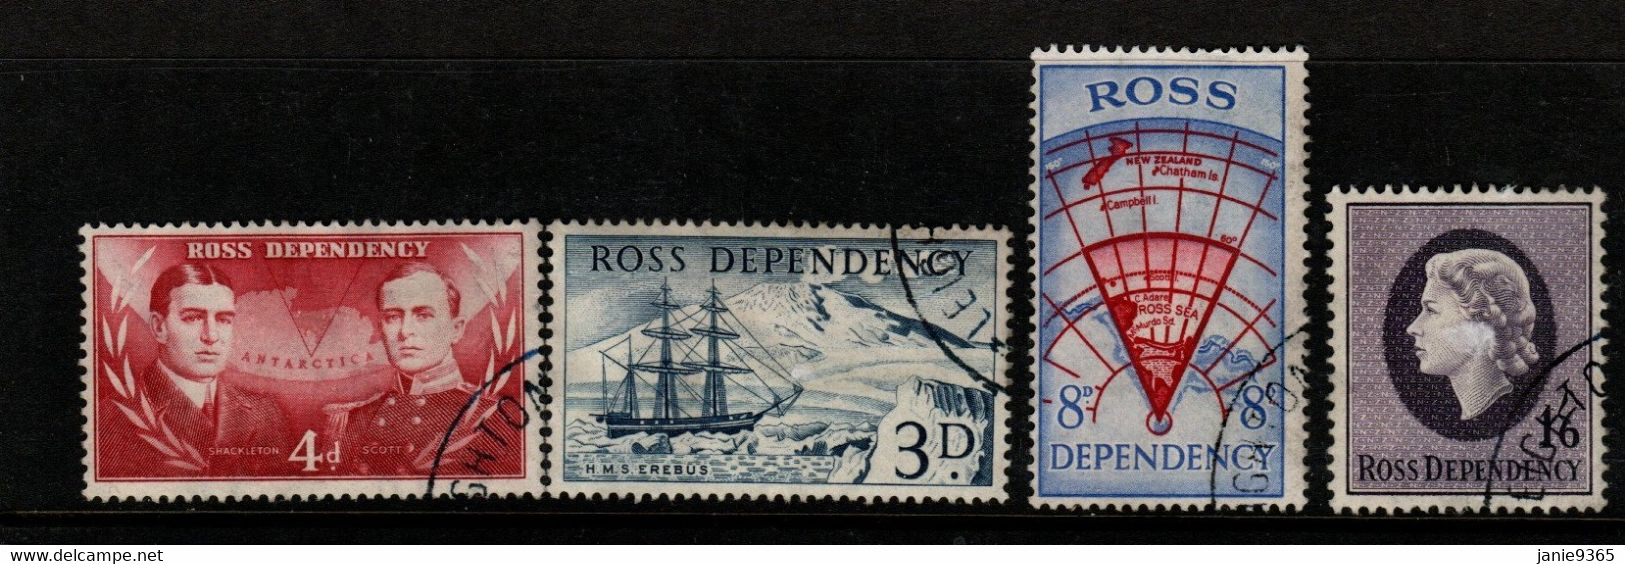 Ross Dependency SG 1-4 1957 Definitives,used - Gebraucht